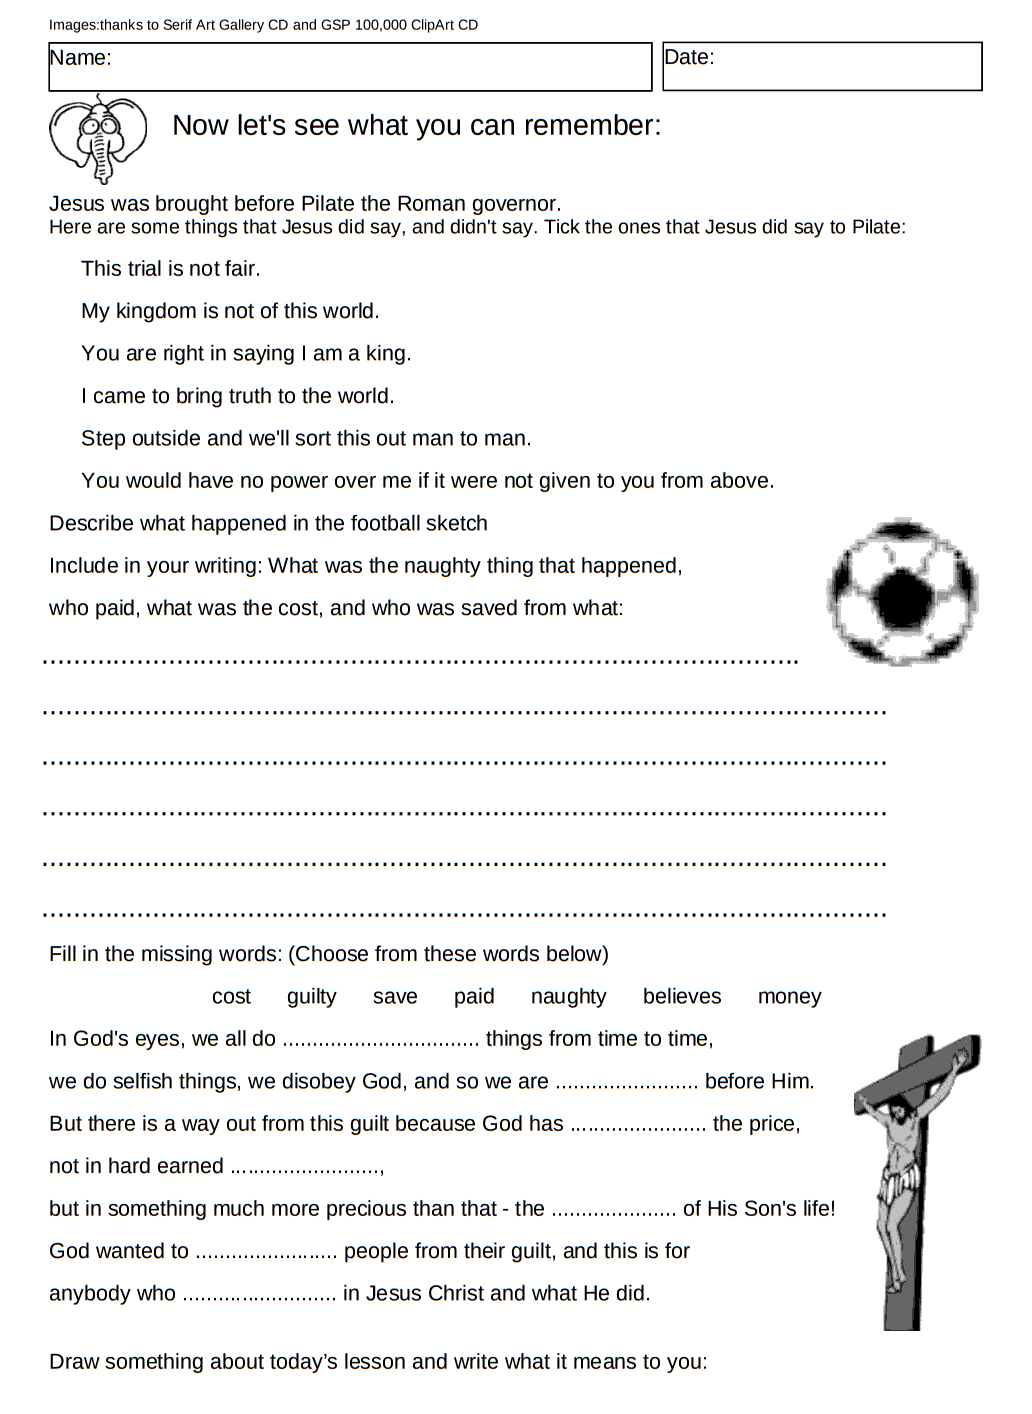 Easter worksheet - what Jesus said to Pilate, the football sketch showed that someone stepped in to pay the debt and comparing it to Jesus on the cross.